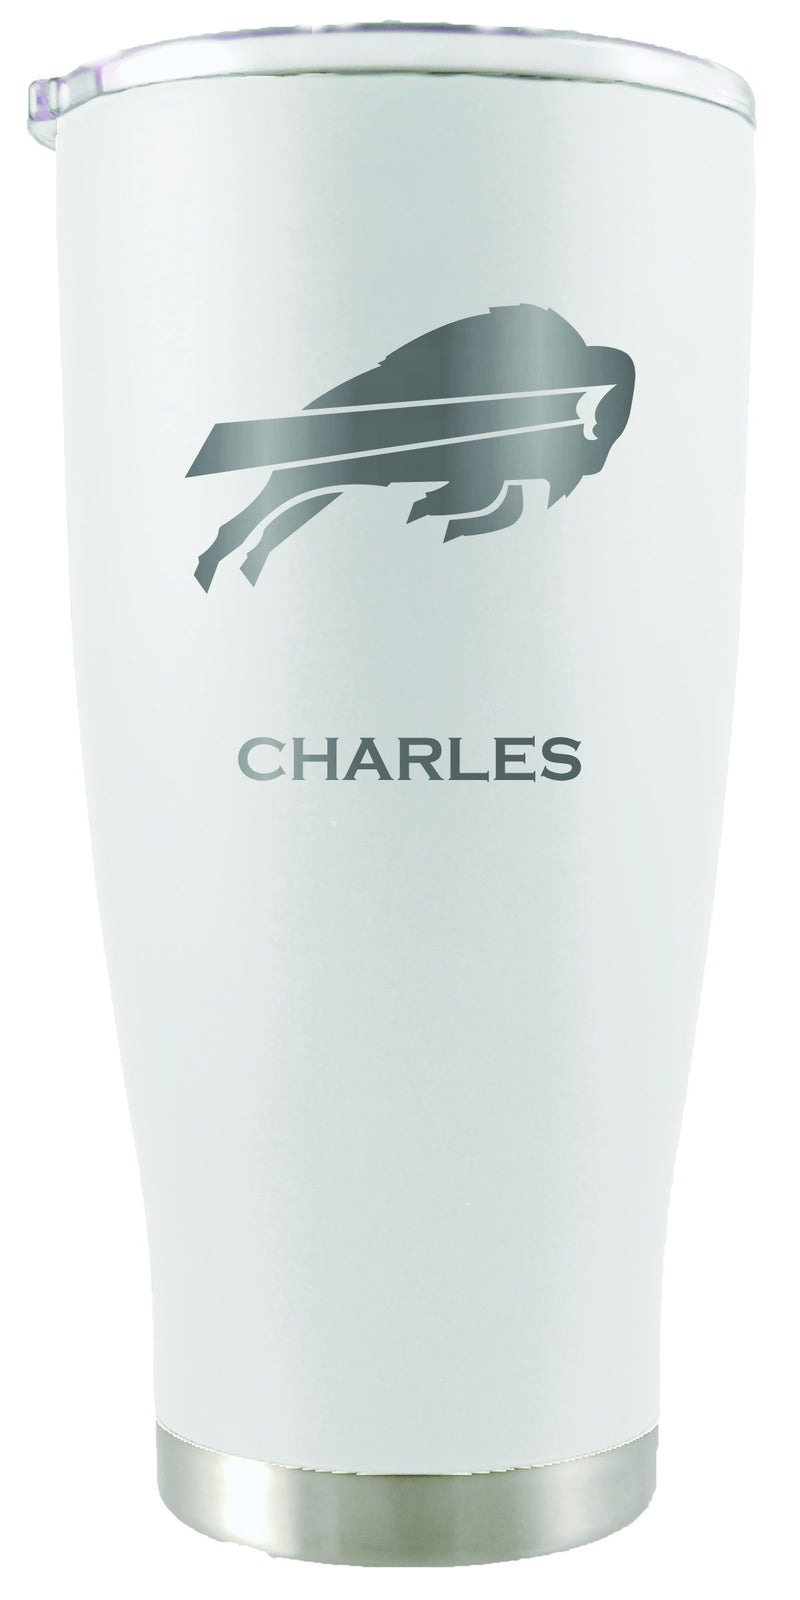 20oz White Personalized Stainless Steel Tumbler | Buffalo Bills
BUF, Buffalo Bills, CurrentProduct, Drinkware_category_All, NFL, Personalized_Personalized, Stainless Steel
The Memory Company